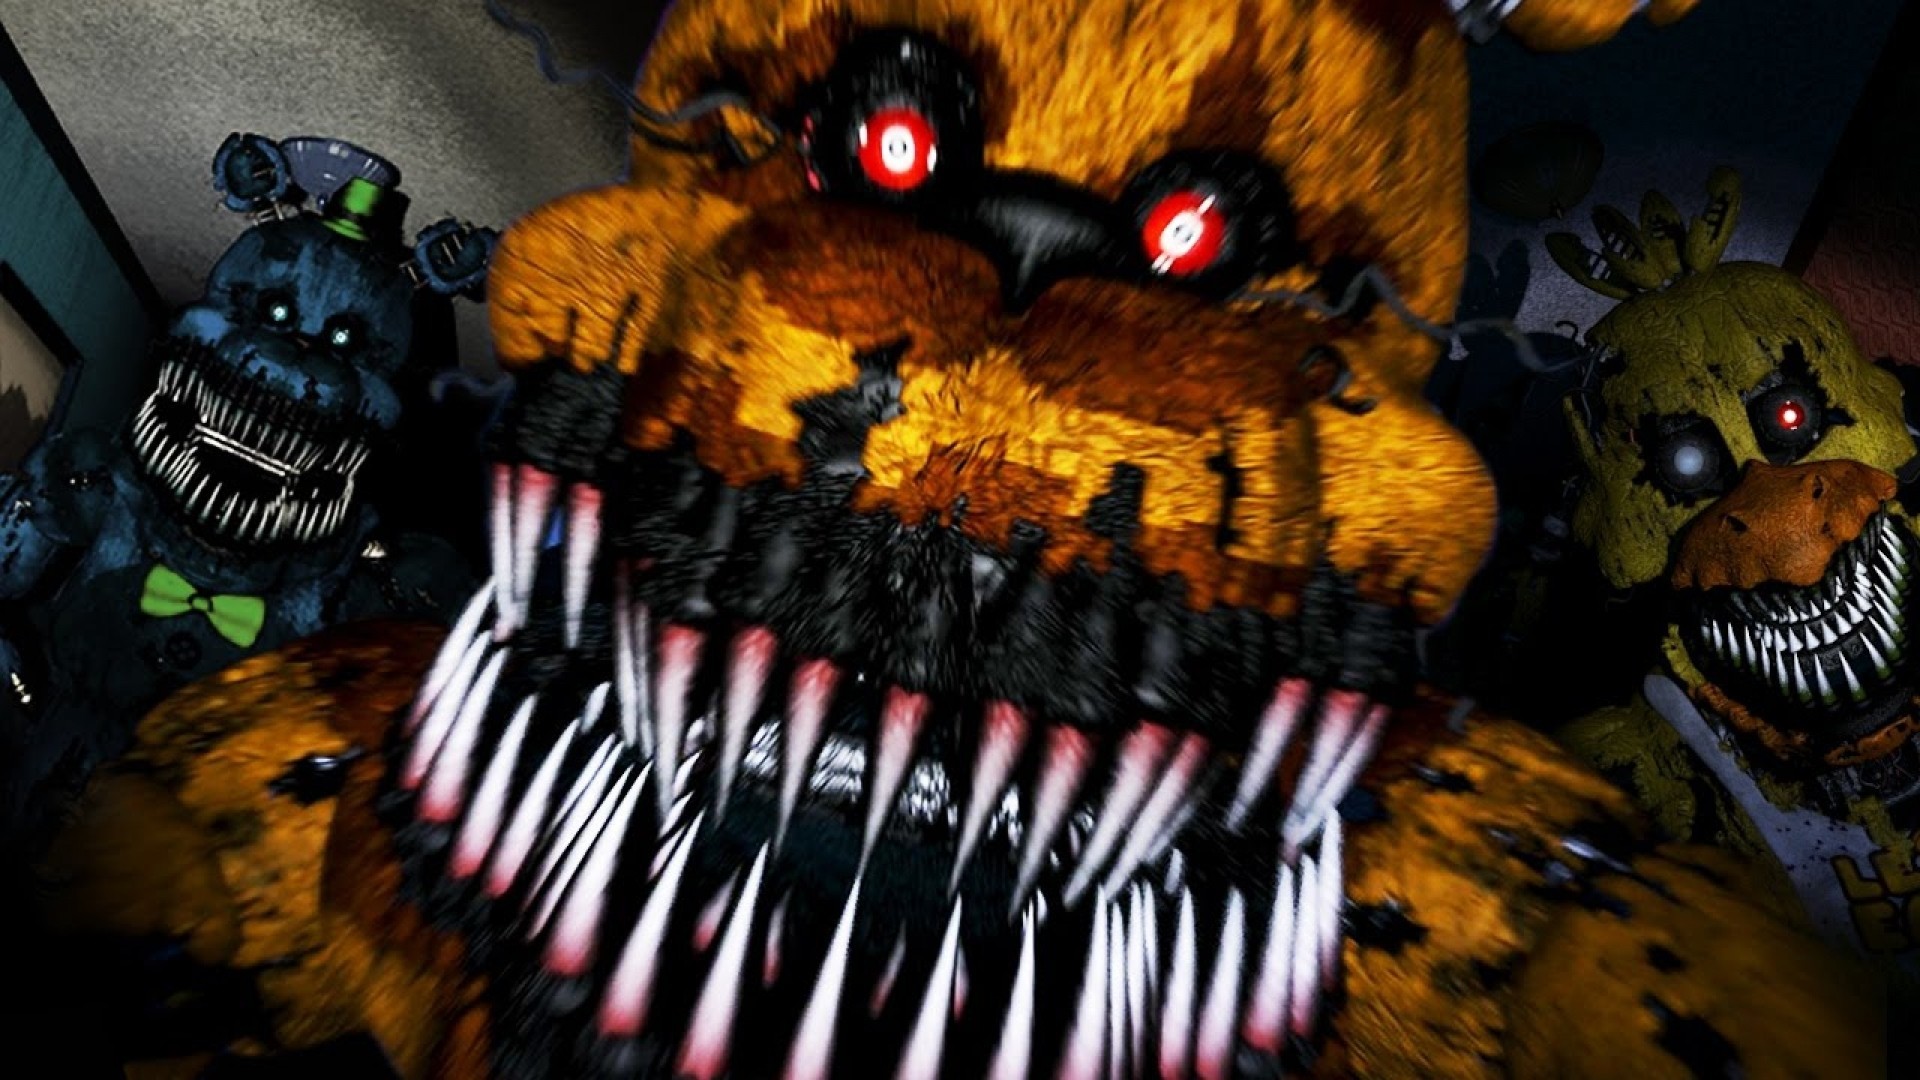 Wallpaper ID 296577  Video Game Five Nights at Freddys 4 Phone Wallpaper  Nightmare Golden Freddy Five Nights At Freddys 2160x3840 free download